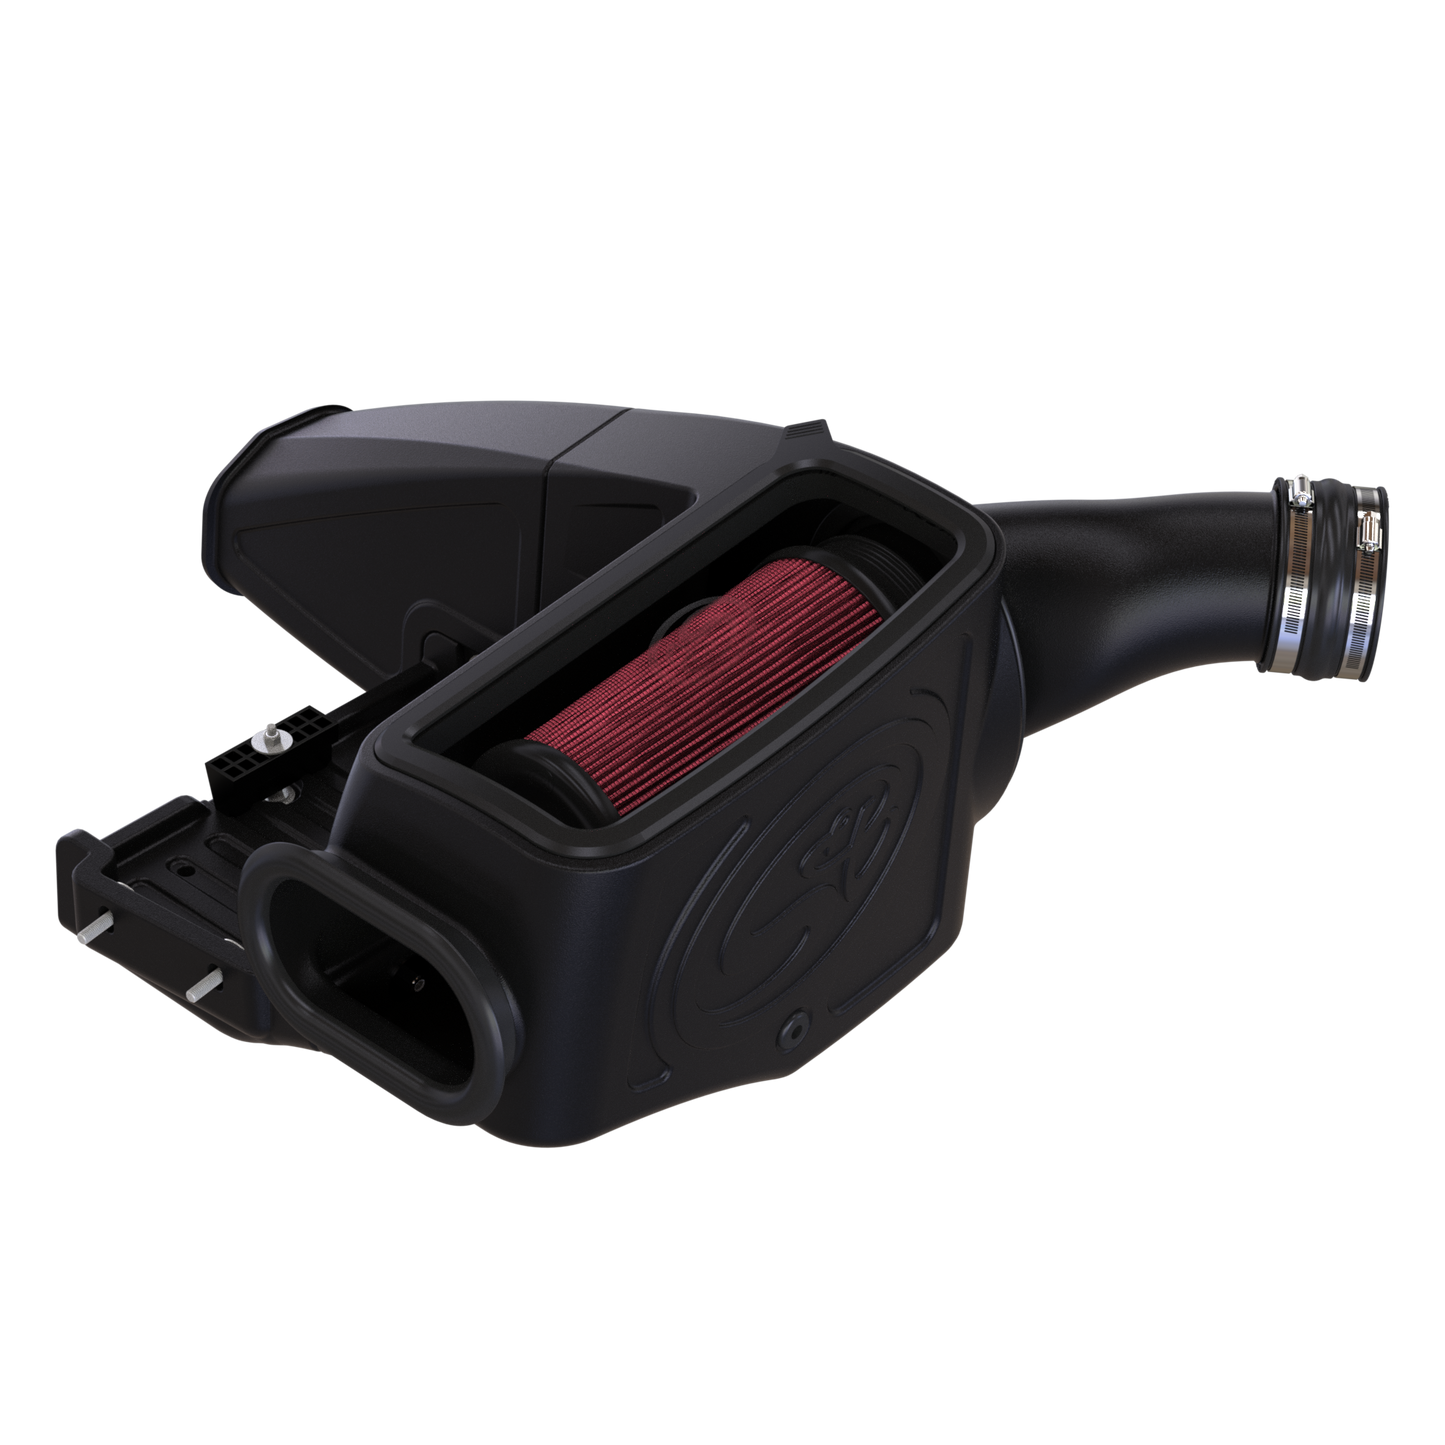  Cold Air Intake for 1998-2003 Ford Powerstroke 7.3L